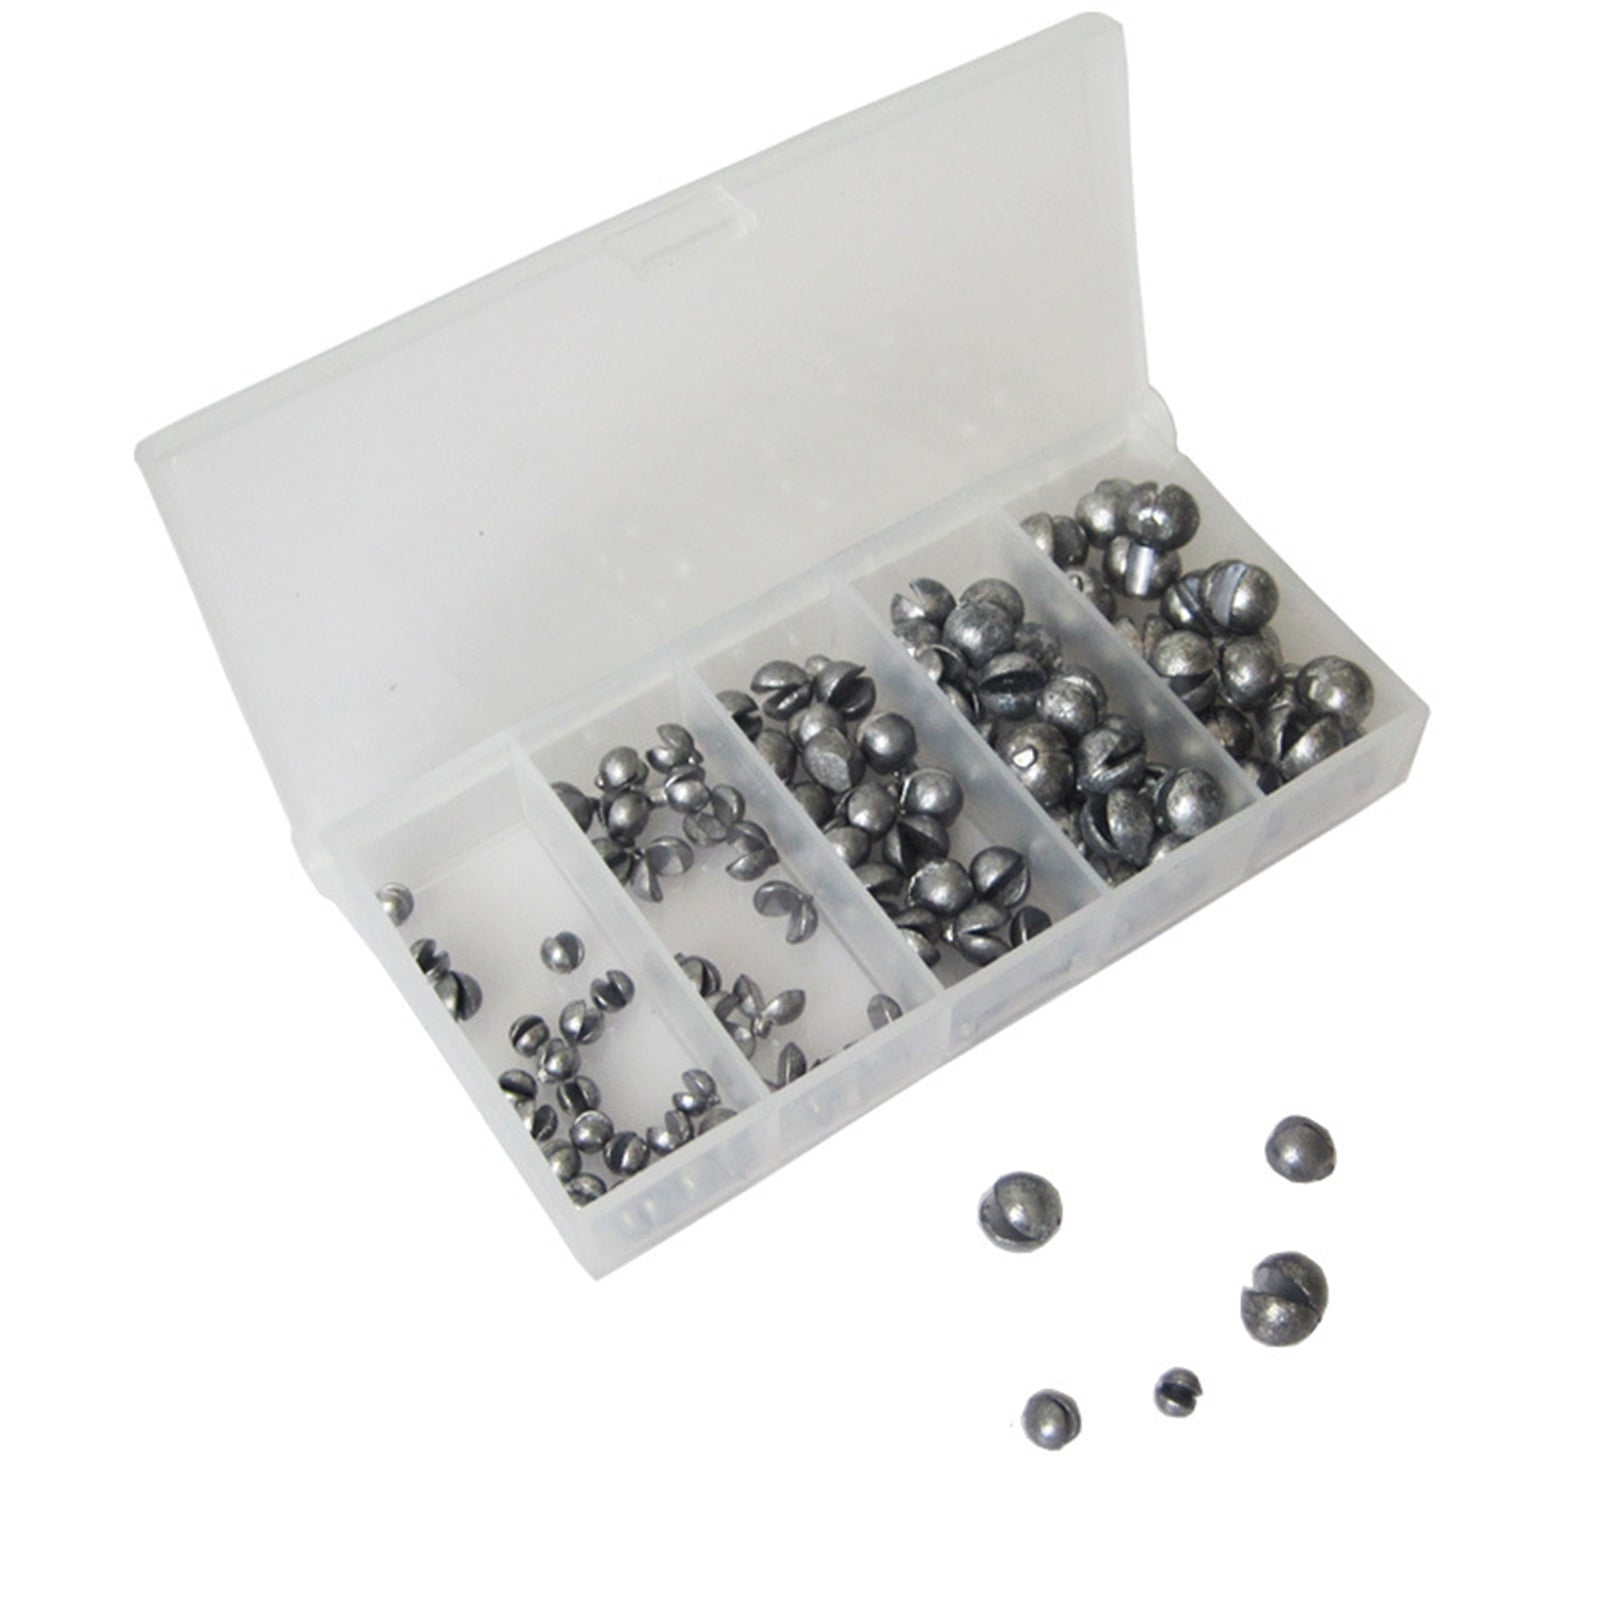 SPRING PARK 100Pcs Cannonball Fishing Open Bite Weights Sinkers Kit, Biting  Round Plumb Bob Tackle Gear with Free Tackle Box